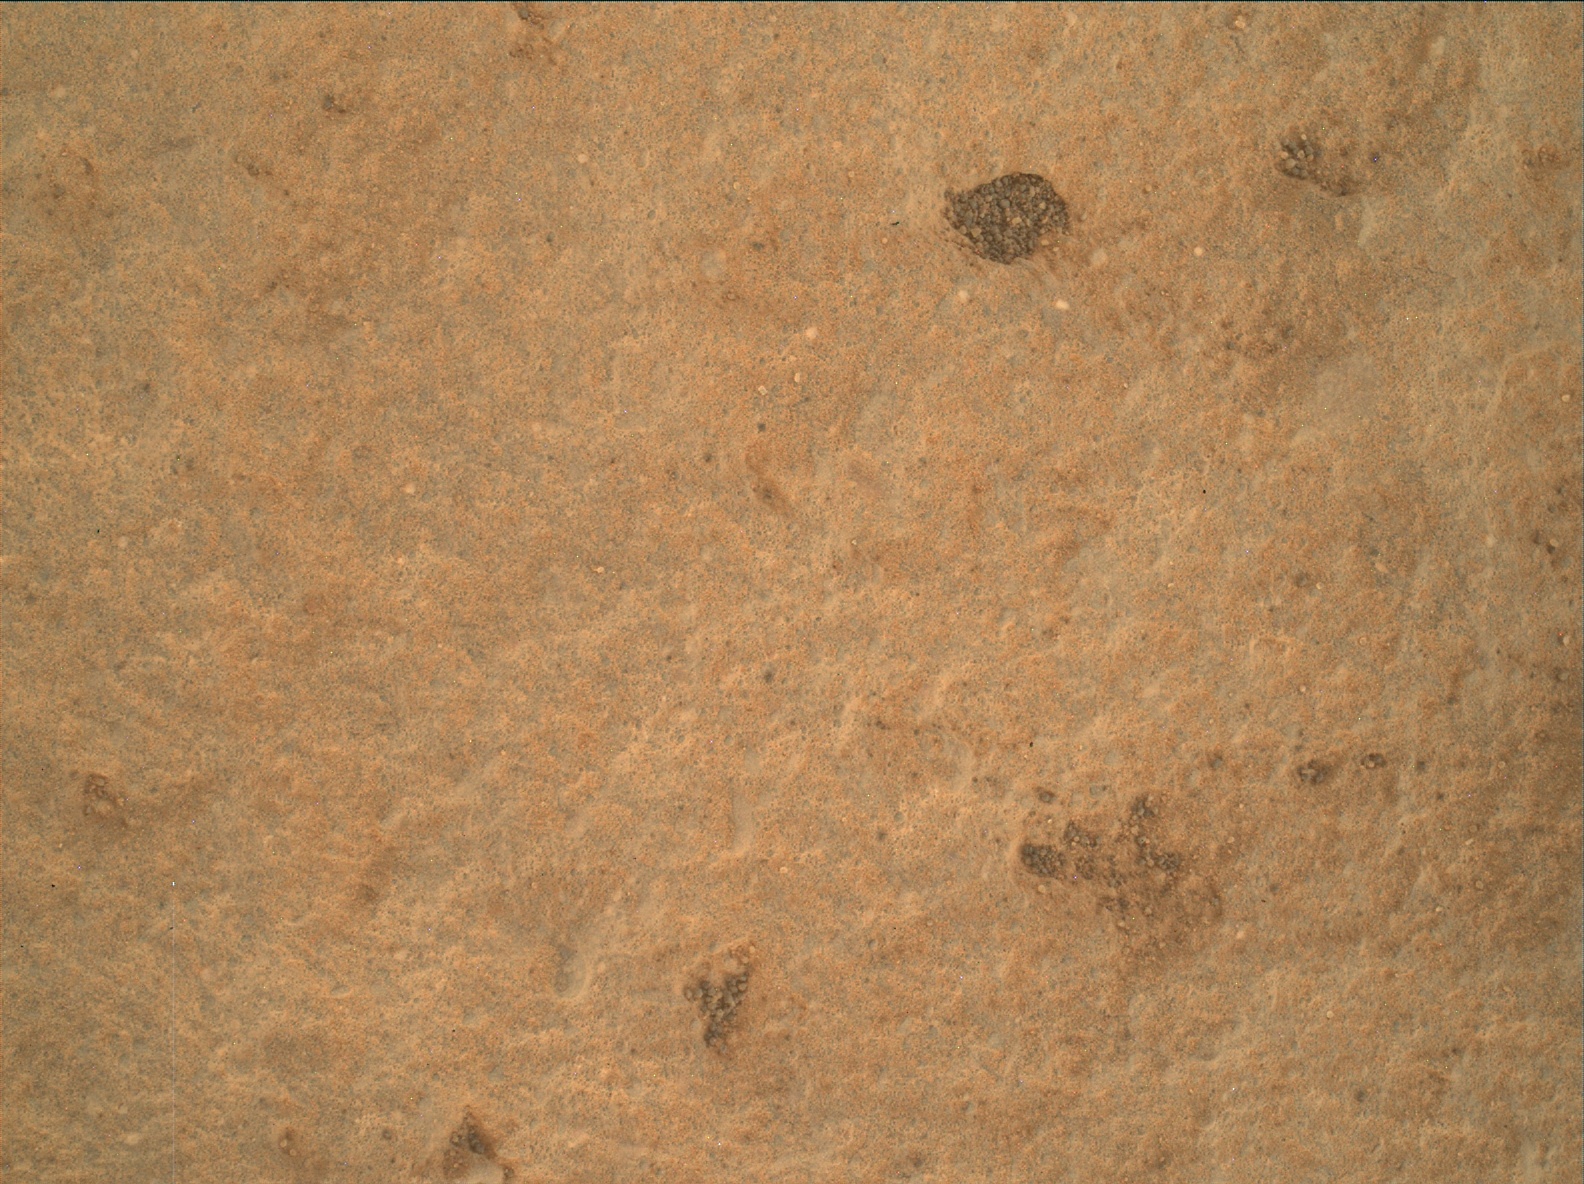 Nasa's Mars rover Curiosity acquired this image using its Mars Hand Lens Imager (MAHLI) on Sol 3324